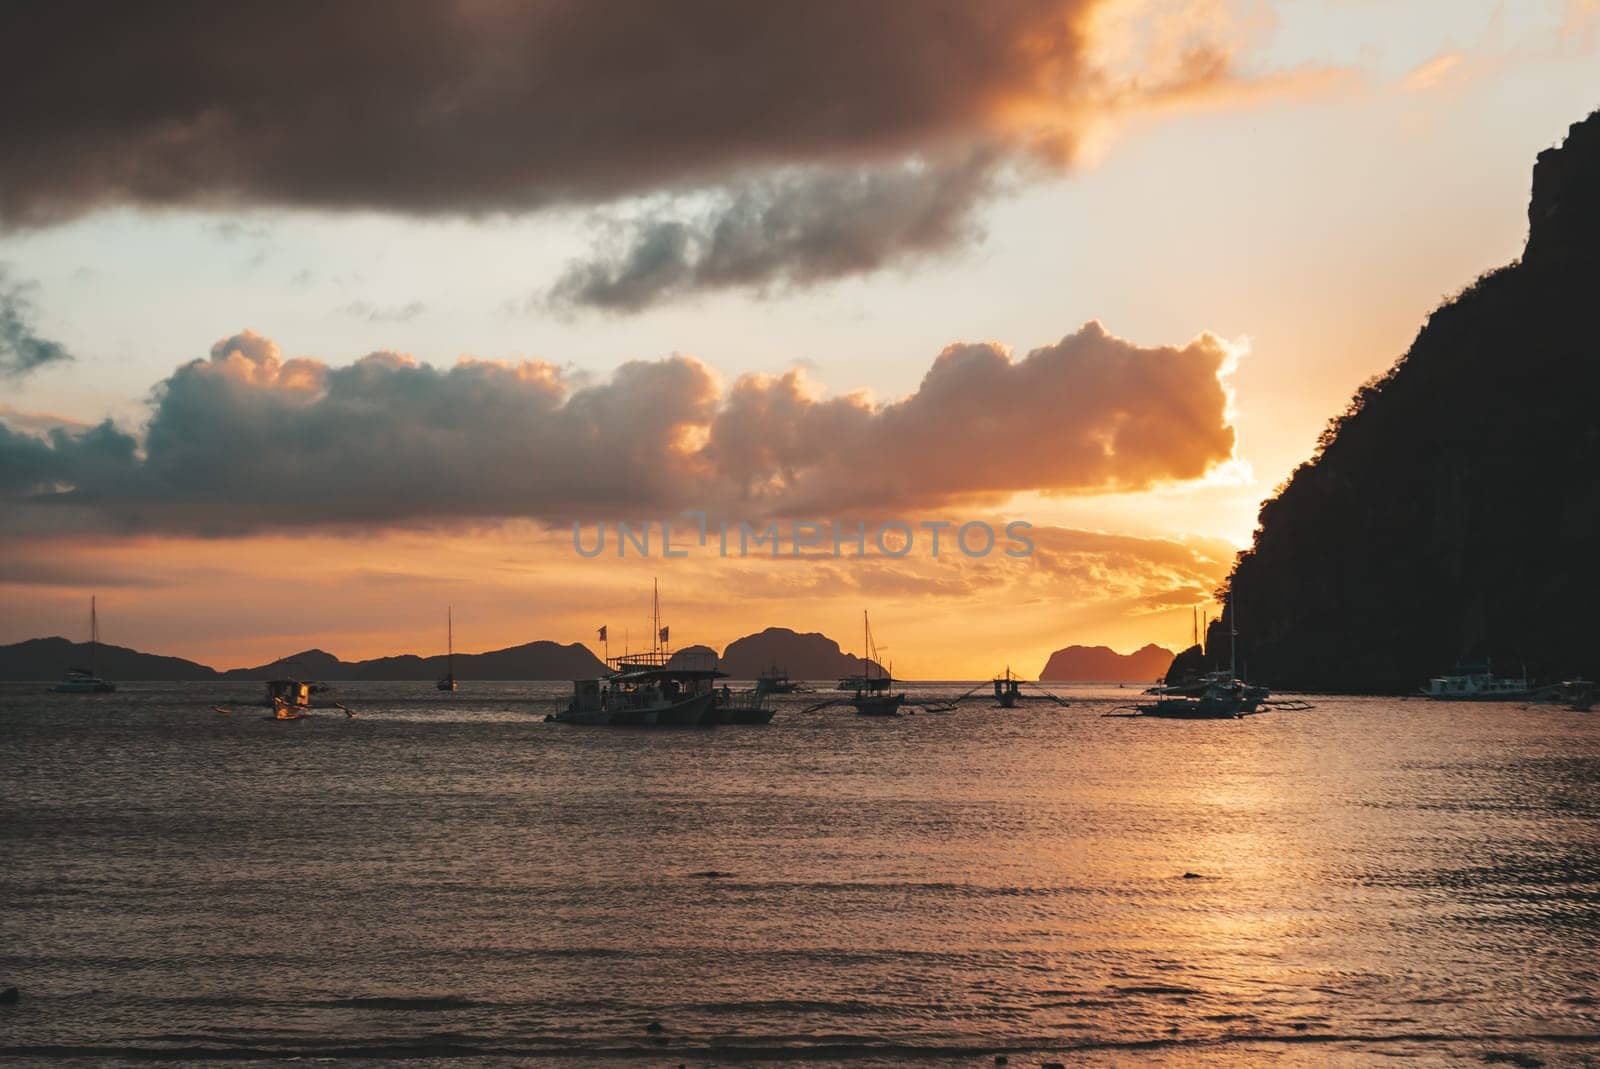 Multiple boats are anchored in a calm bay under a vibrant sunset. The sky glows with shades of orange and gold, while dark clouds create dramatic contrasts.